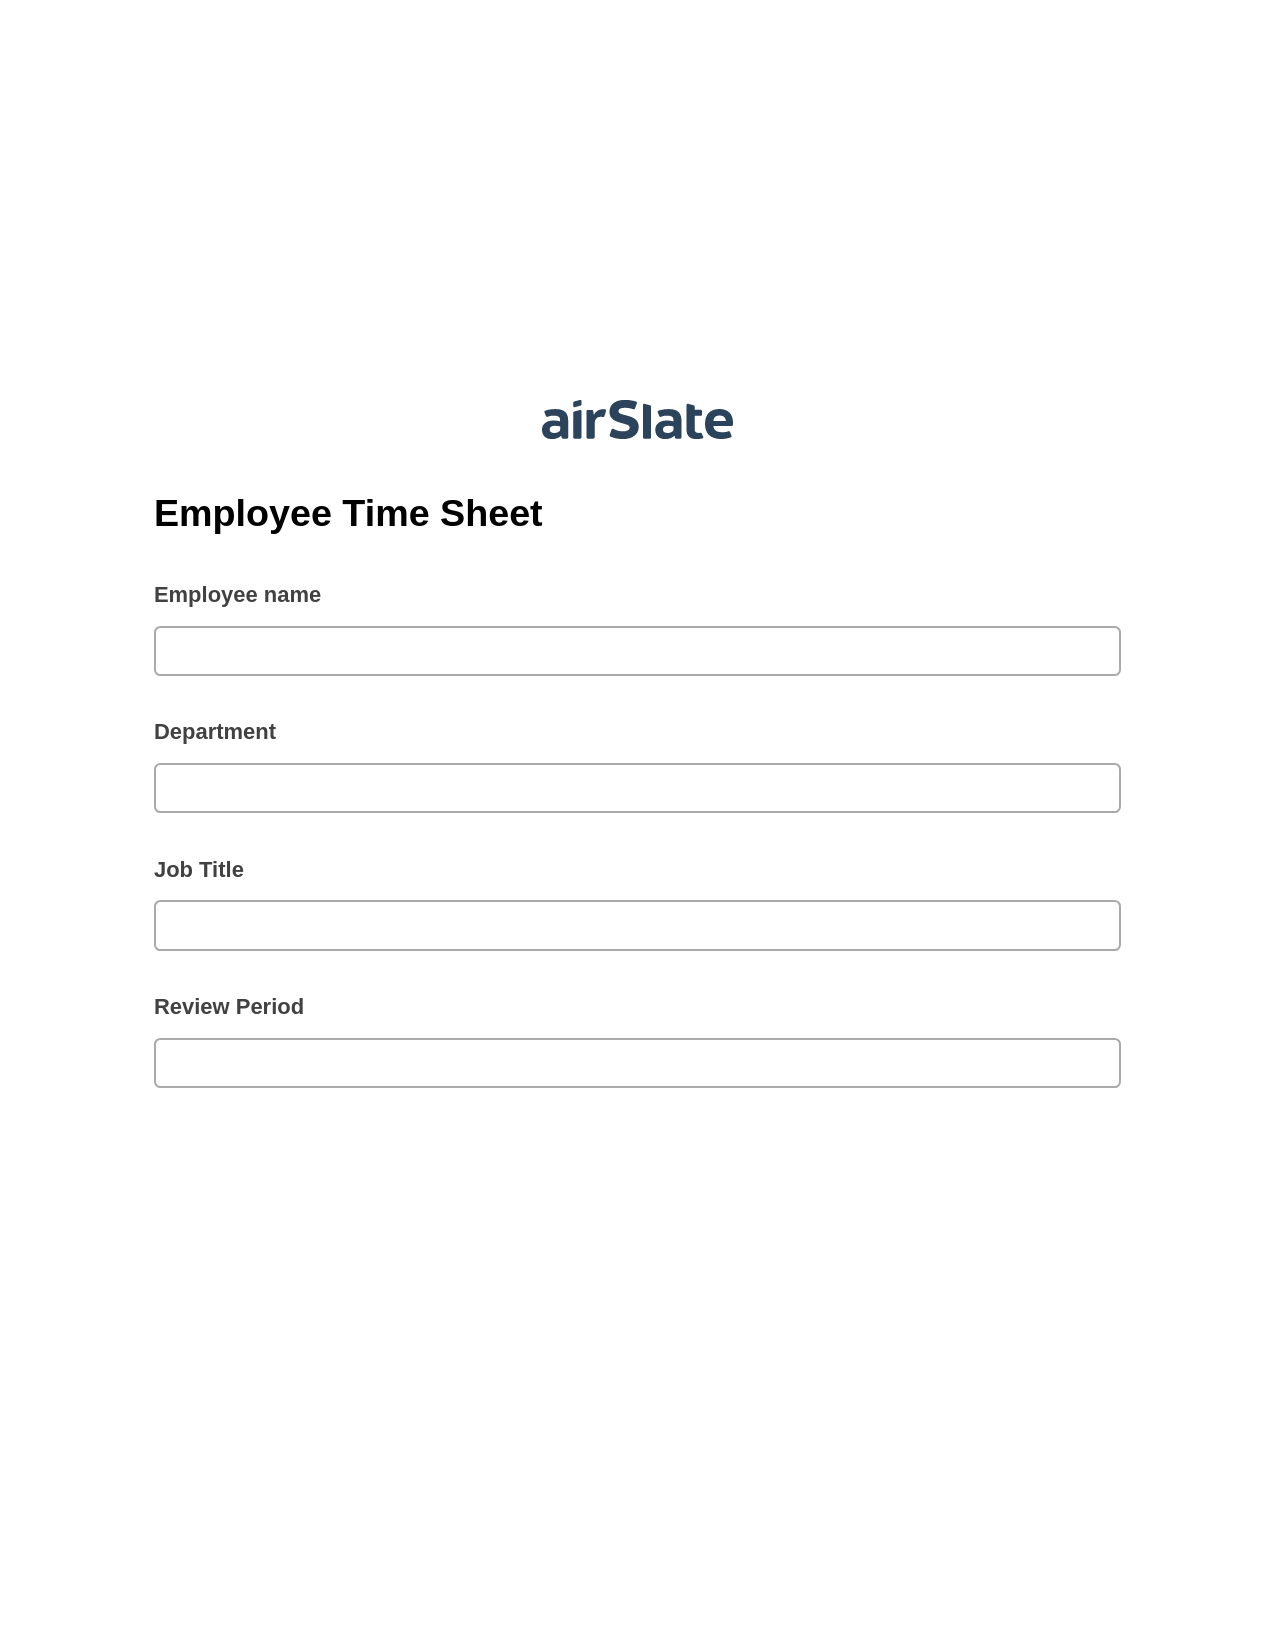 Employee Time Sheet Pre-fill from CSV File Bot, Update Audit Trail Bot, Export to Excel 365 Bot